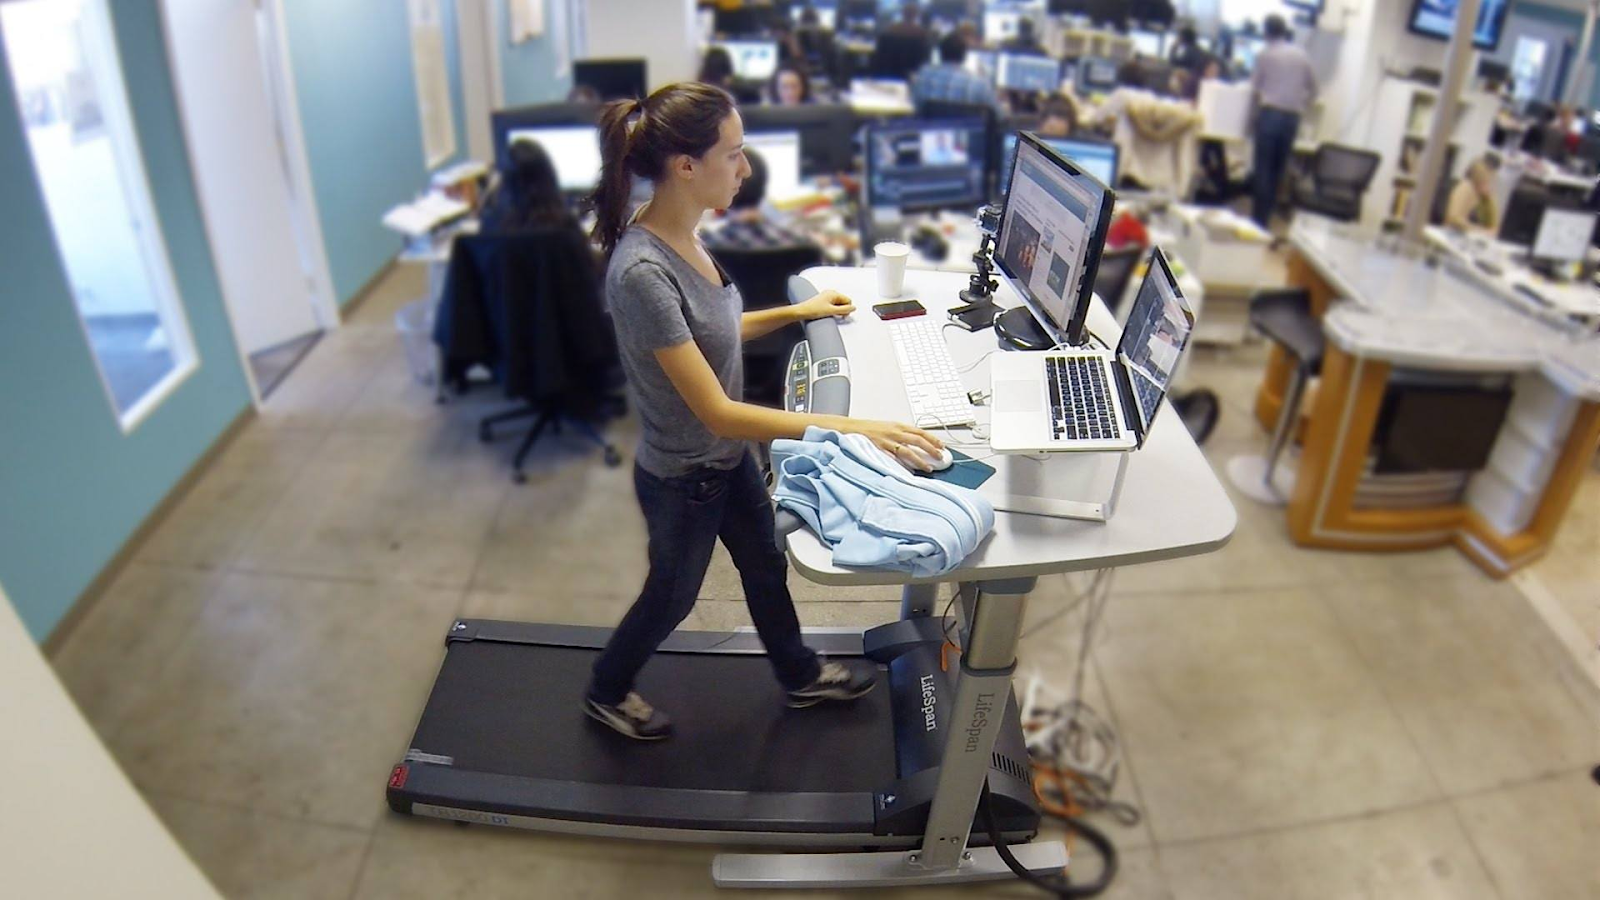 Smart desks use modern technology to improve lifestyle. Source: Housely